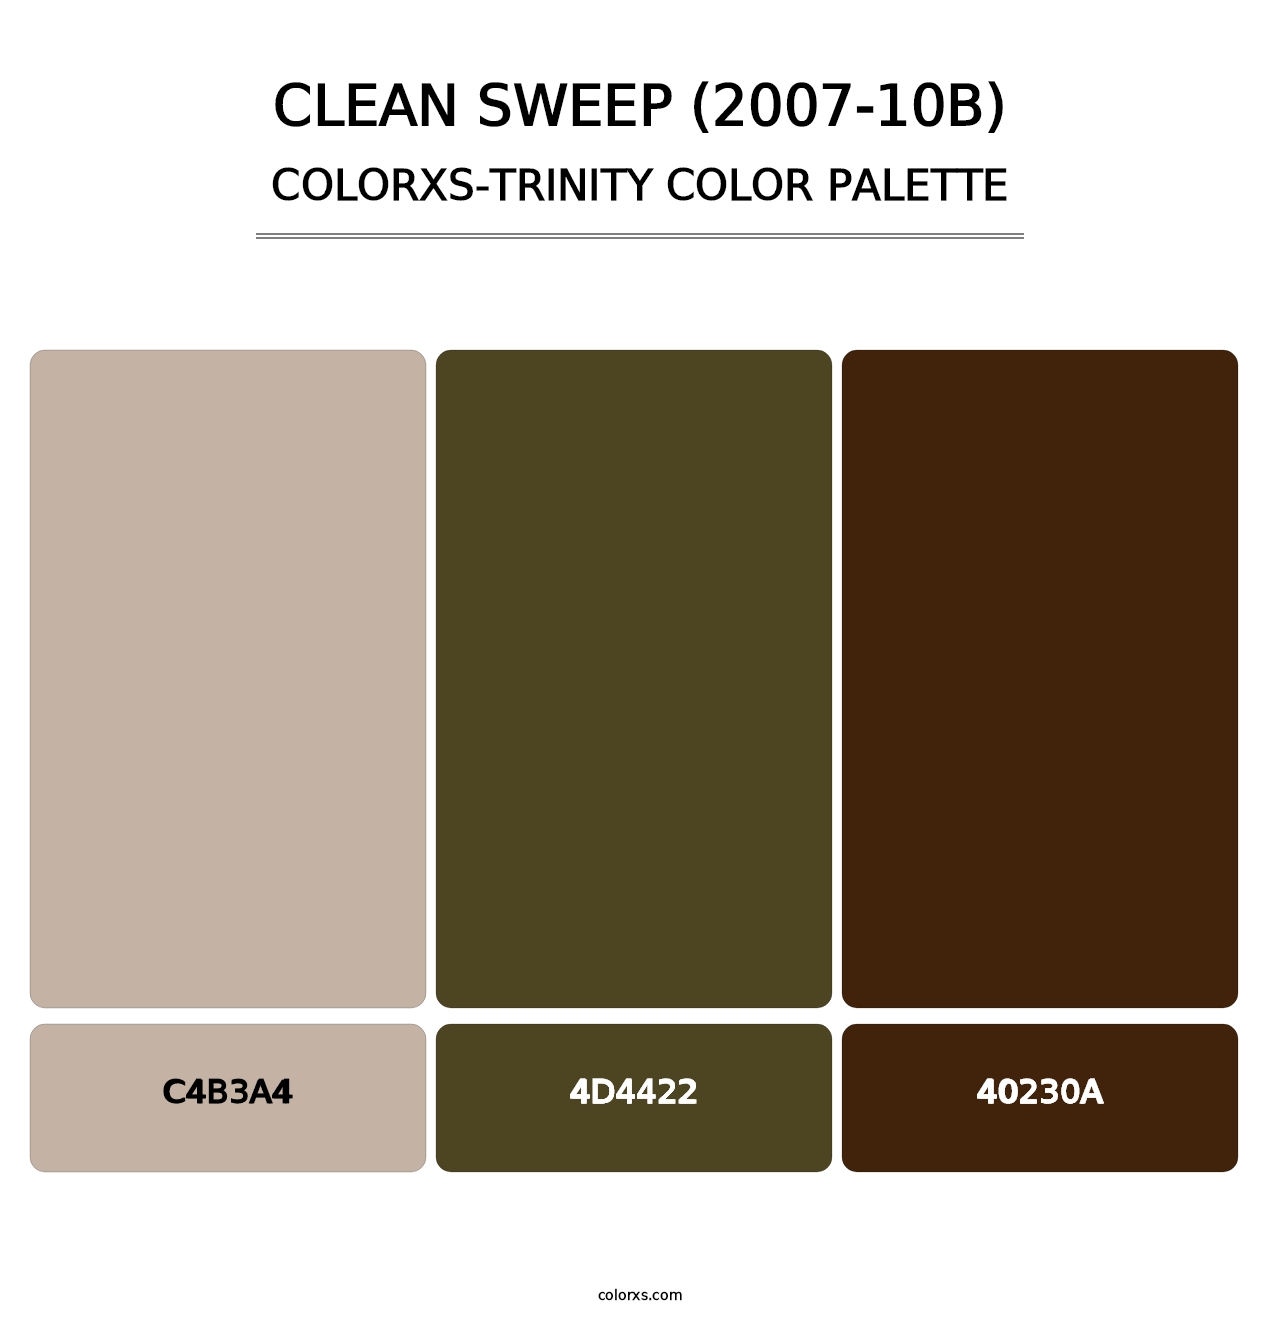 Clean Sweep (2007-10B) - Colorxs Trinity Palette